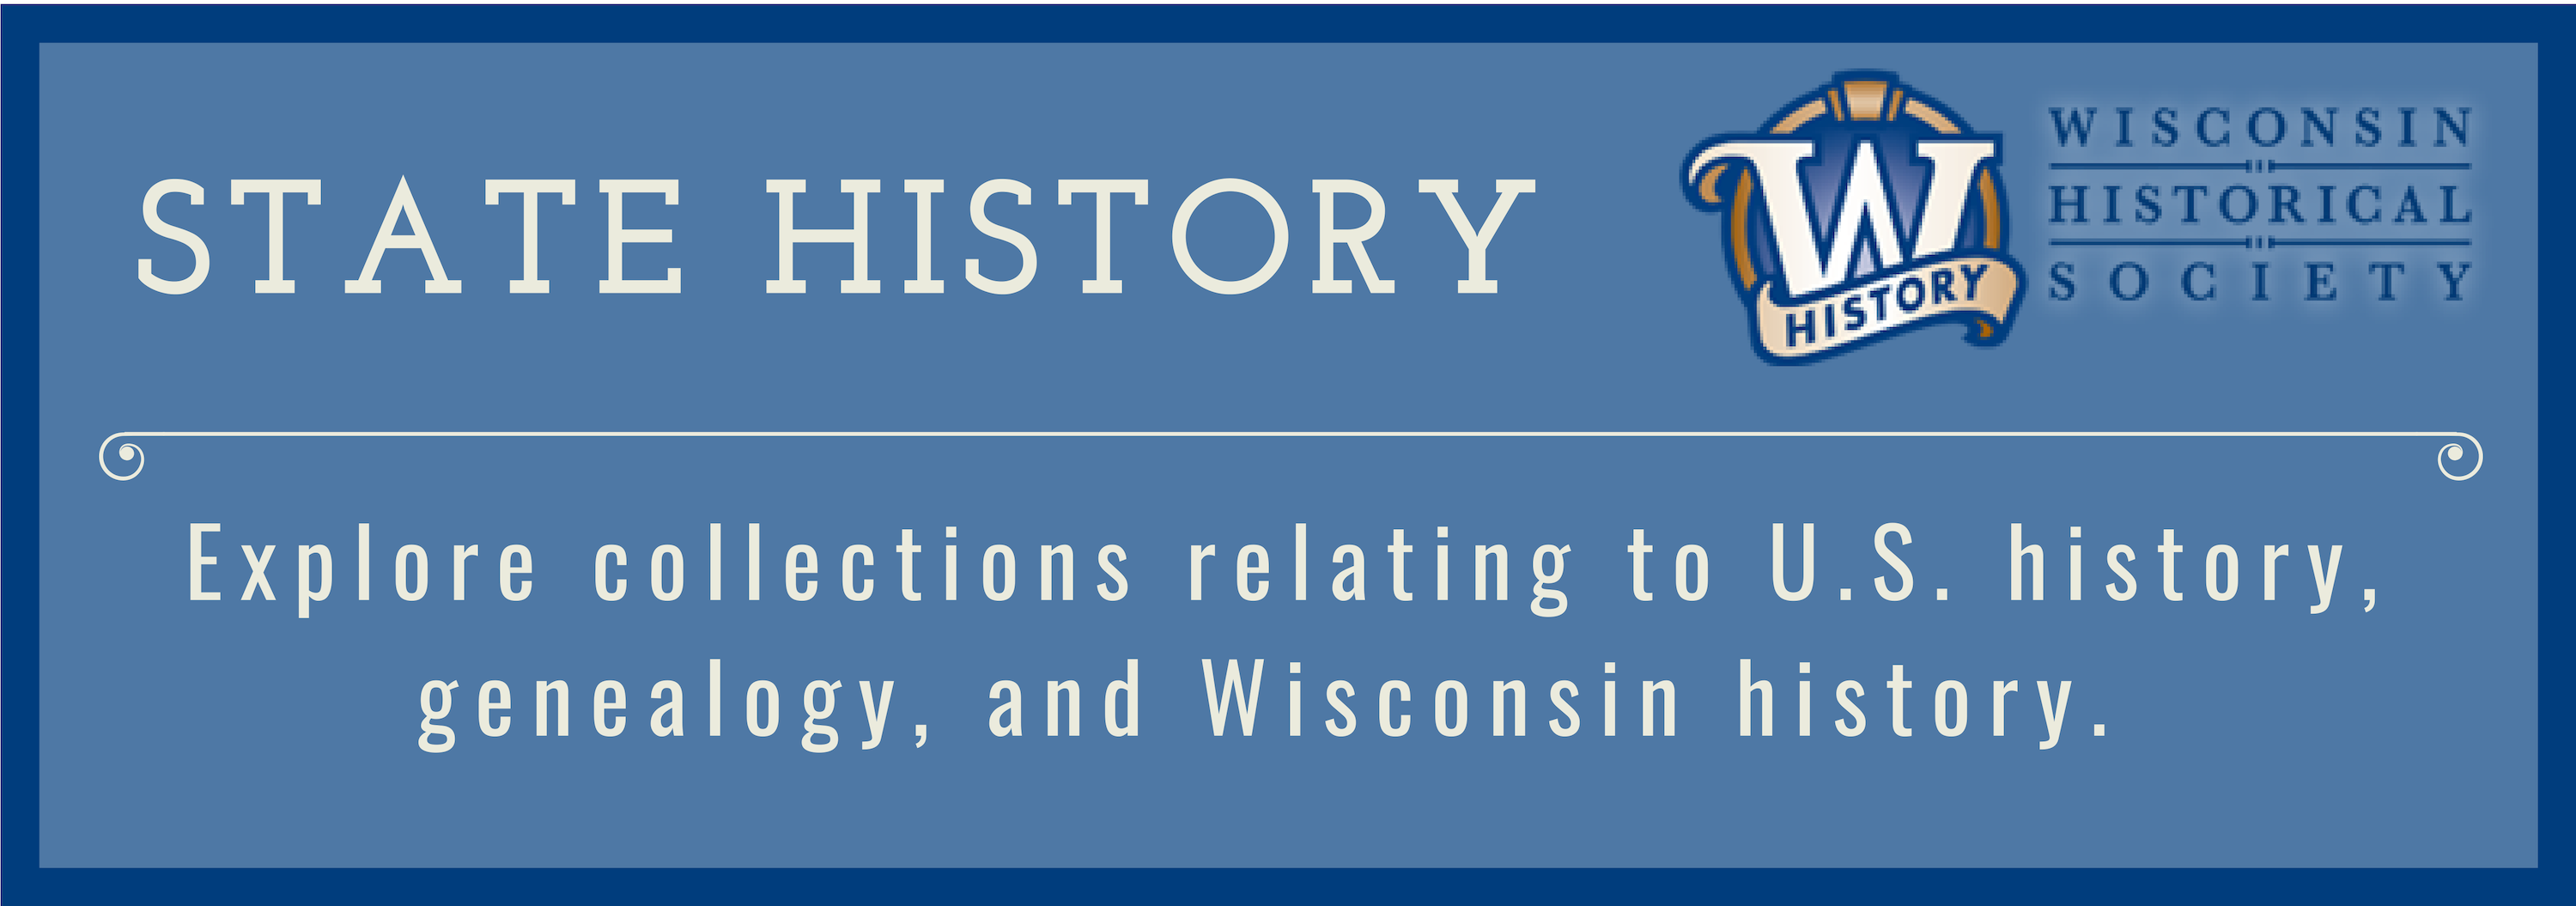 Wisconsin State Historical Society logo and tagline for collections